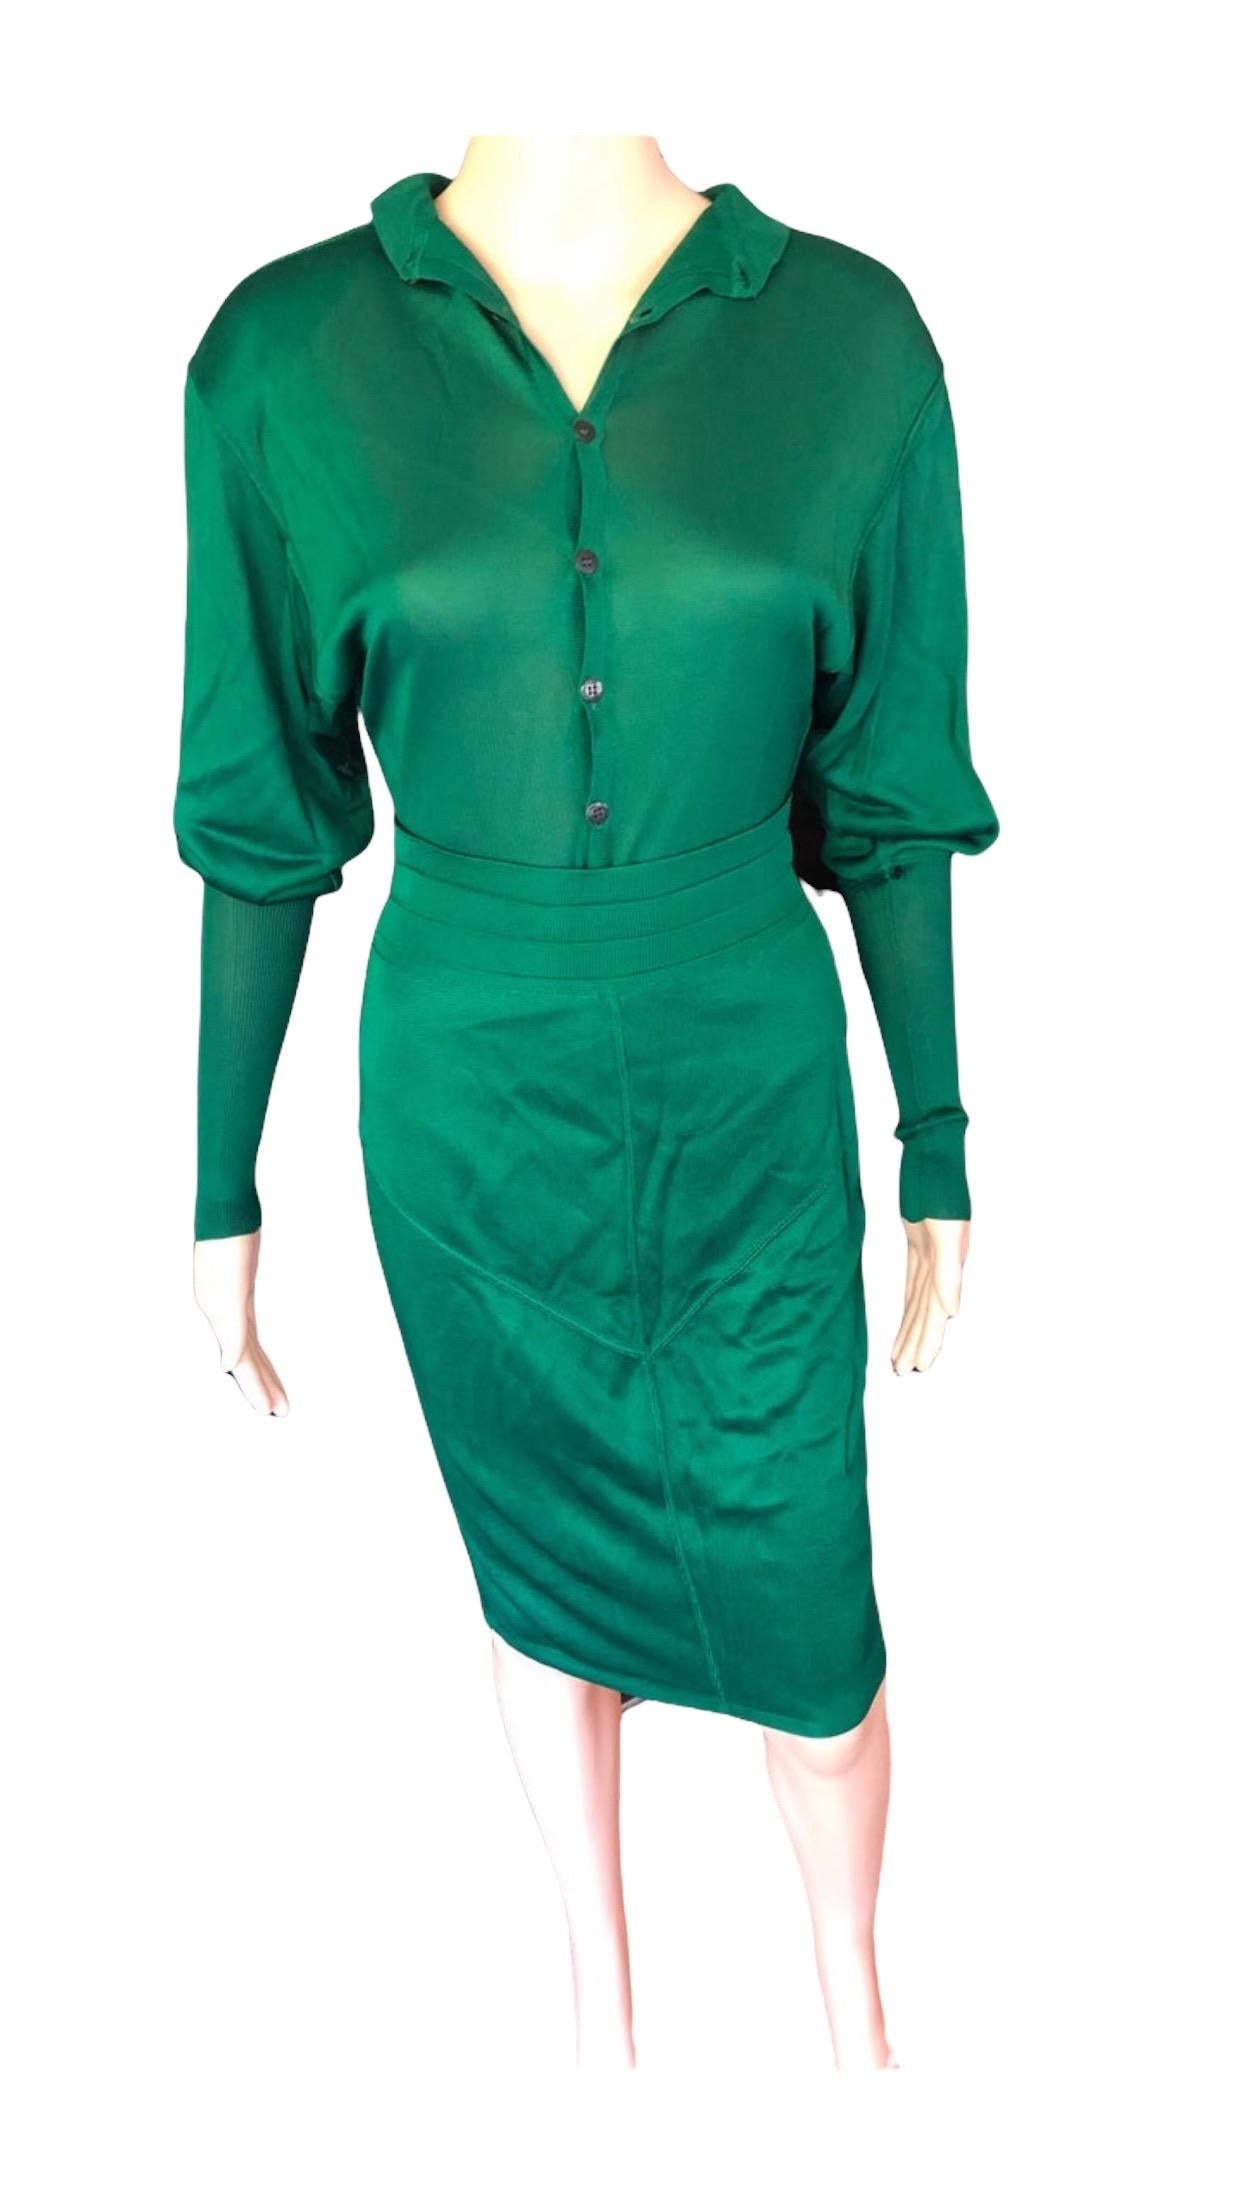 Azzedine Alaia Vintage Green Knit Skirt and Bodysuit Top 2 Piece Set In Good Condition For Sale In Naples, FL